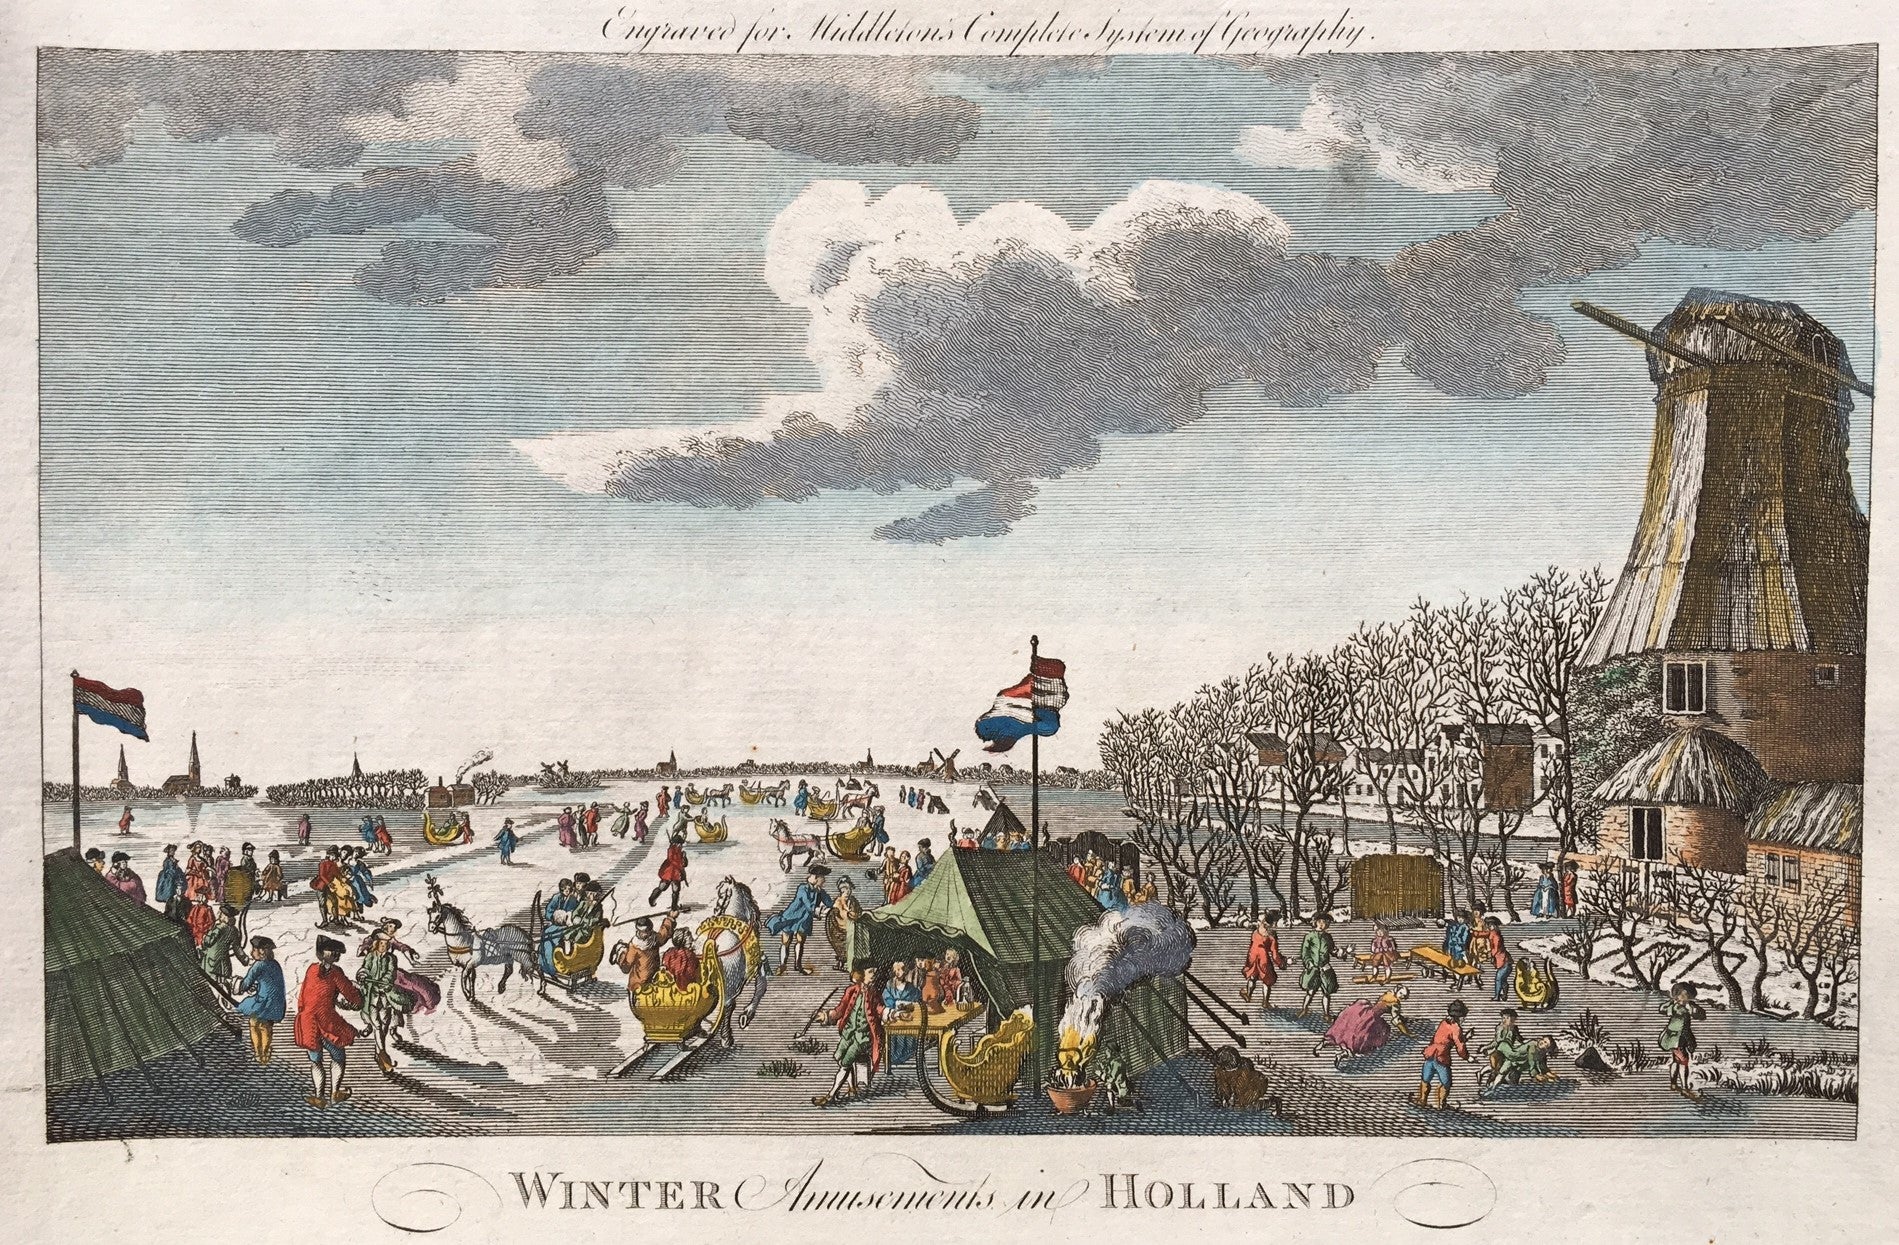 Antique print "Winter Amusements in Holland". Handcoloured engraving, published in Middleton's Complete System of Geography. Nice dutch winterscene with people skating , sleighs, mill etc.